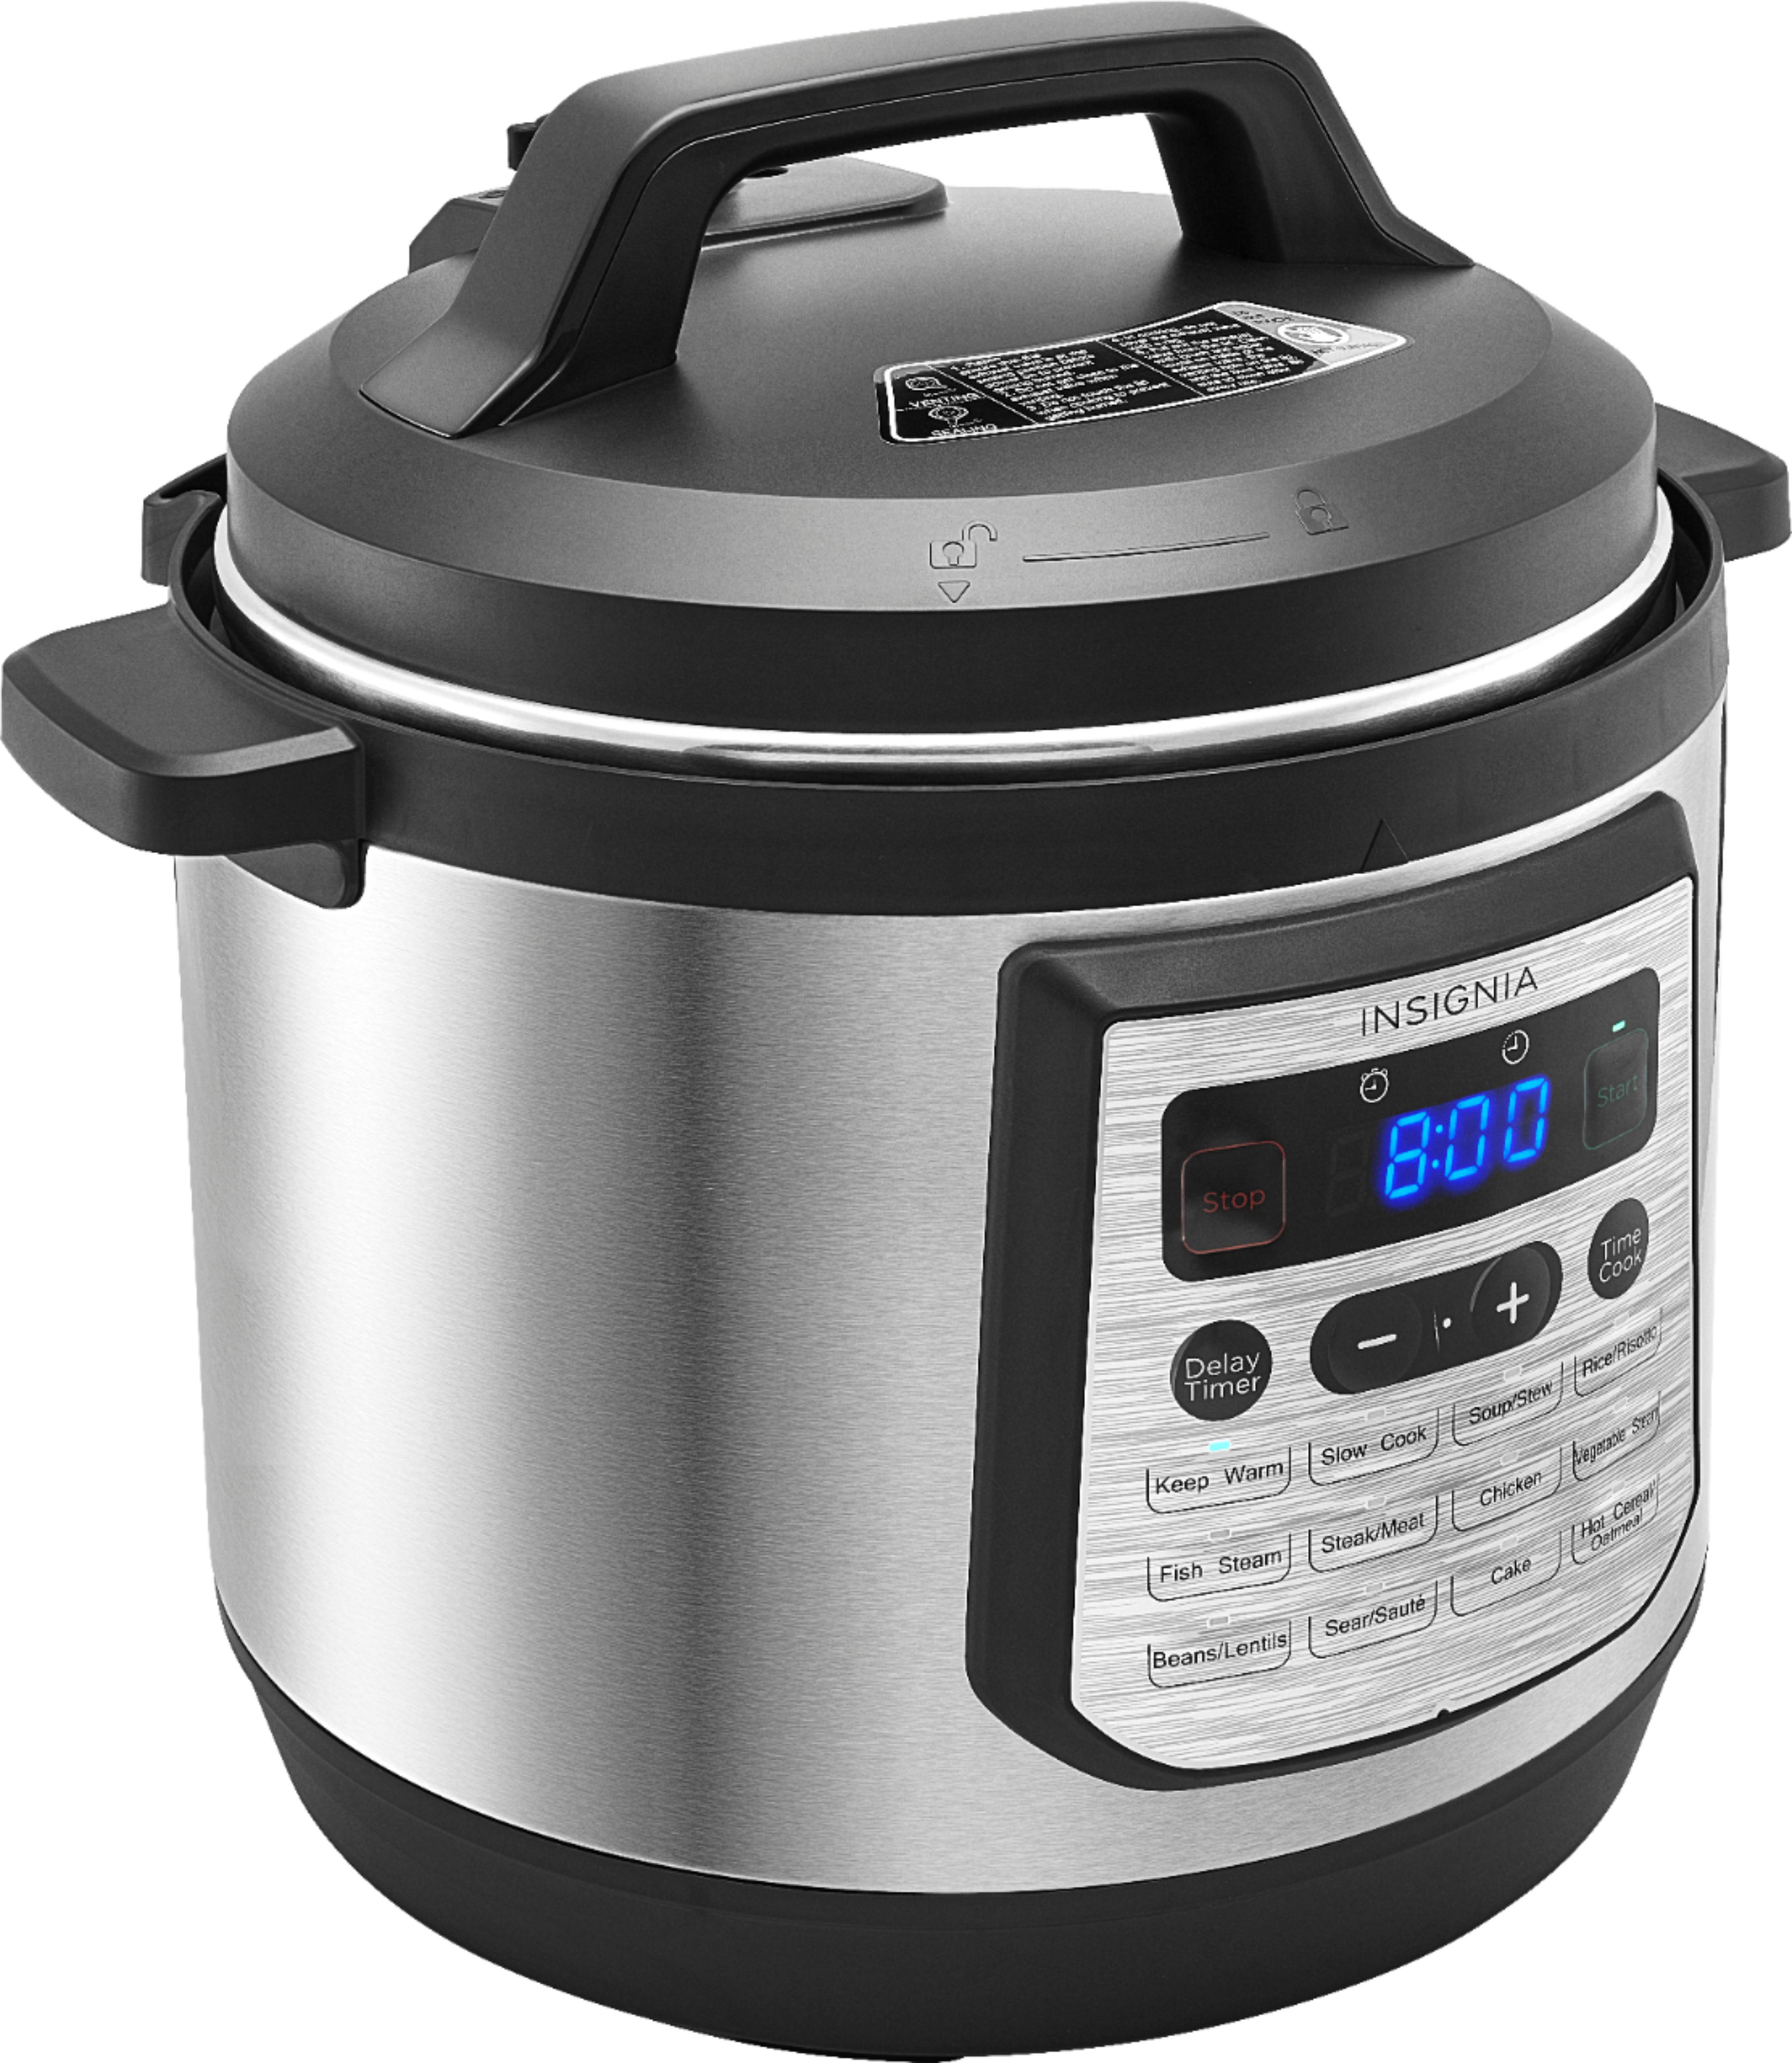 Insignia™ - 8qt Digital Multi Cooker $80 Off Today Only At Best Buy